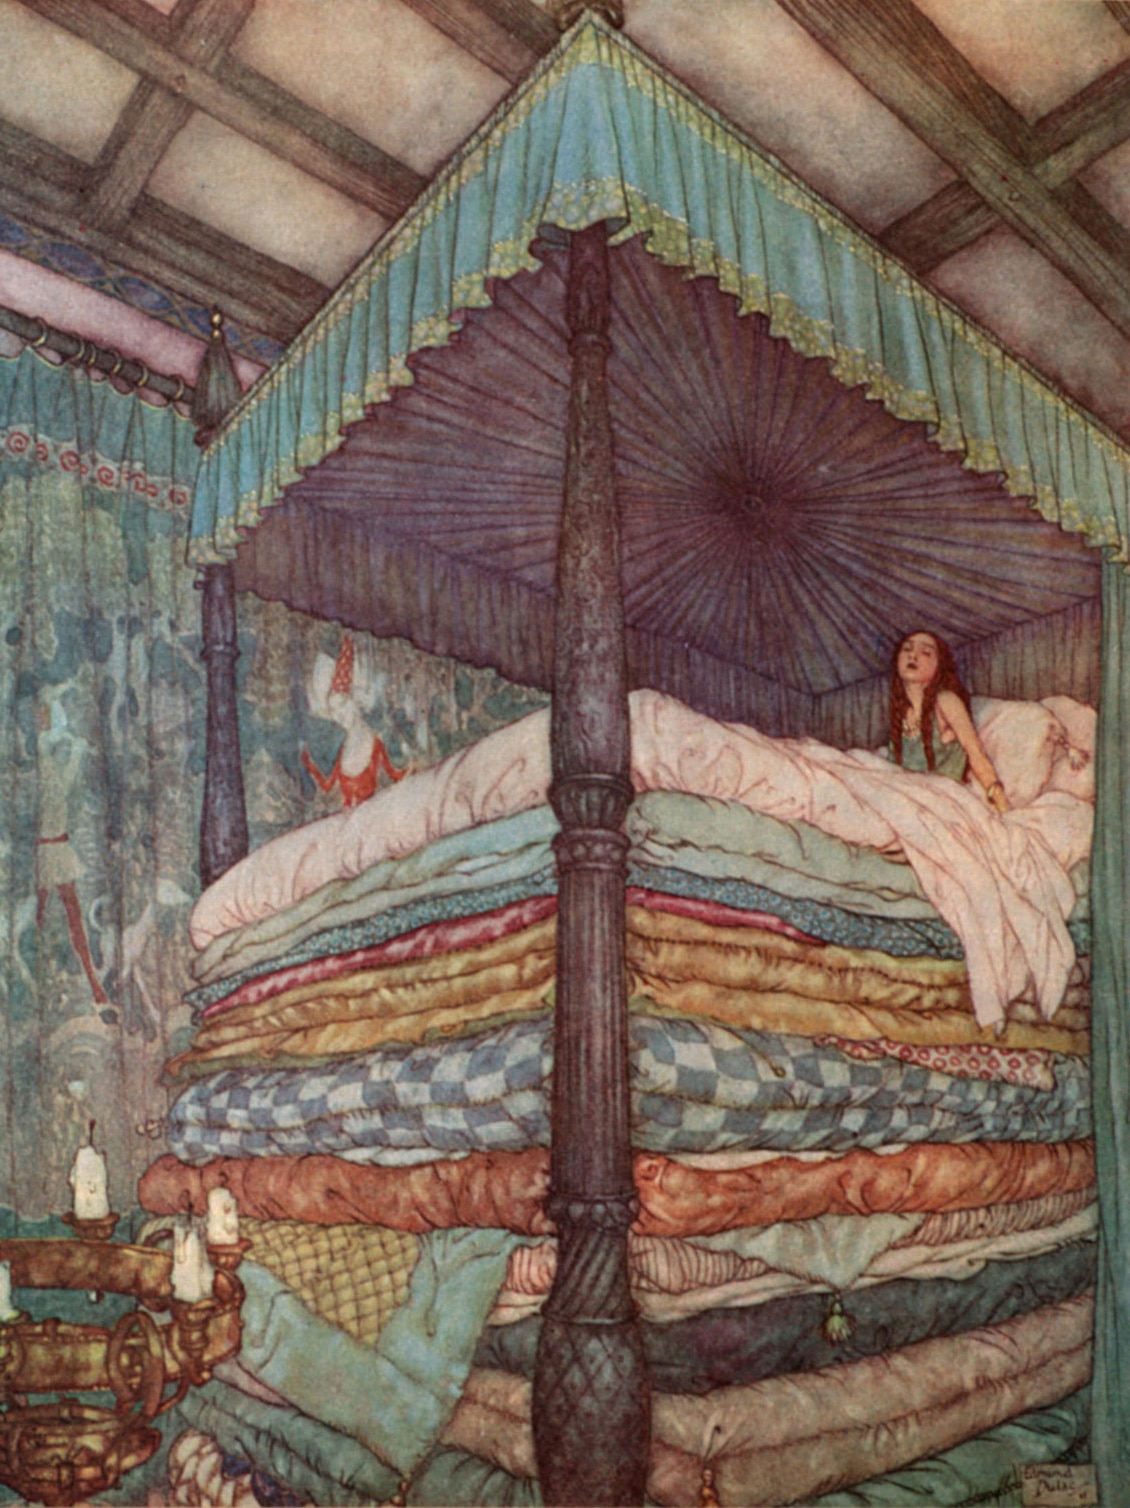 The Princess and Pea, illustration by Edmund Dulac (1911)